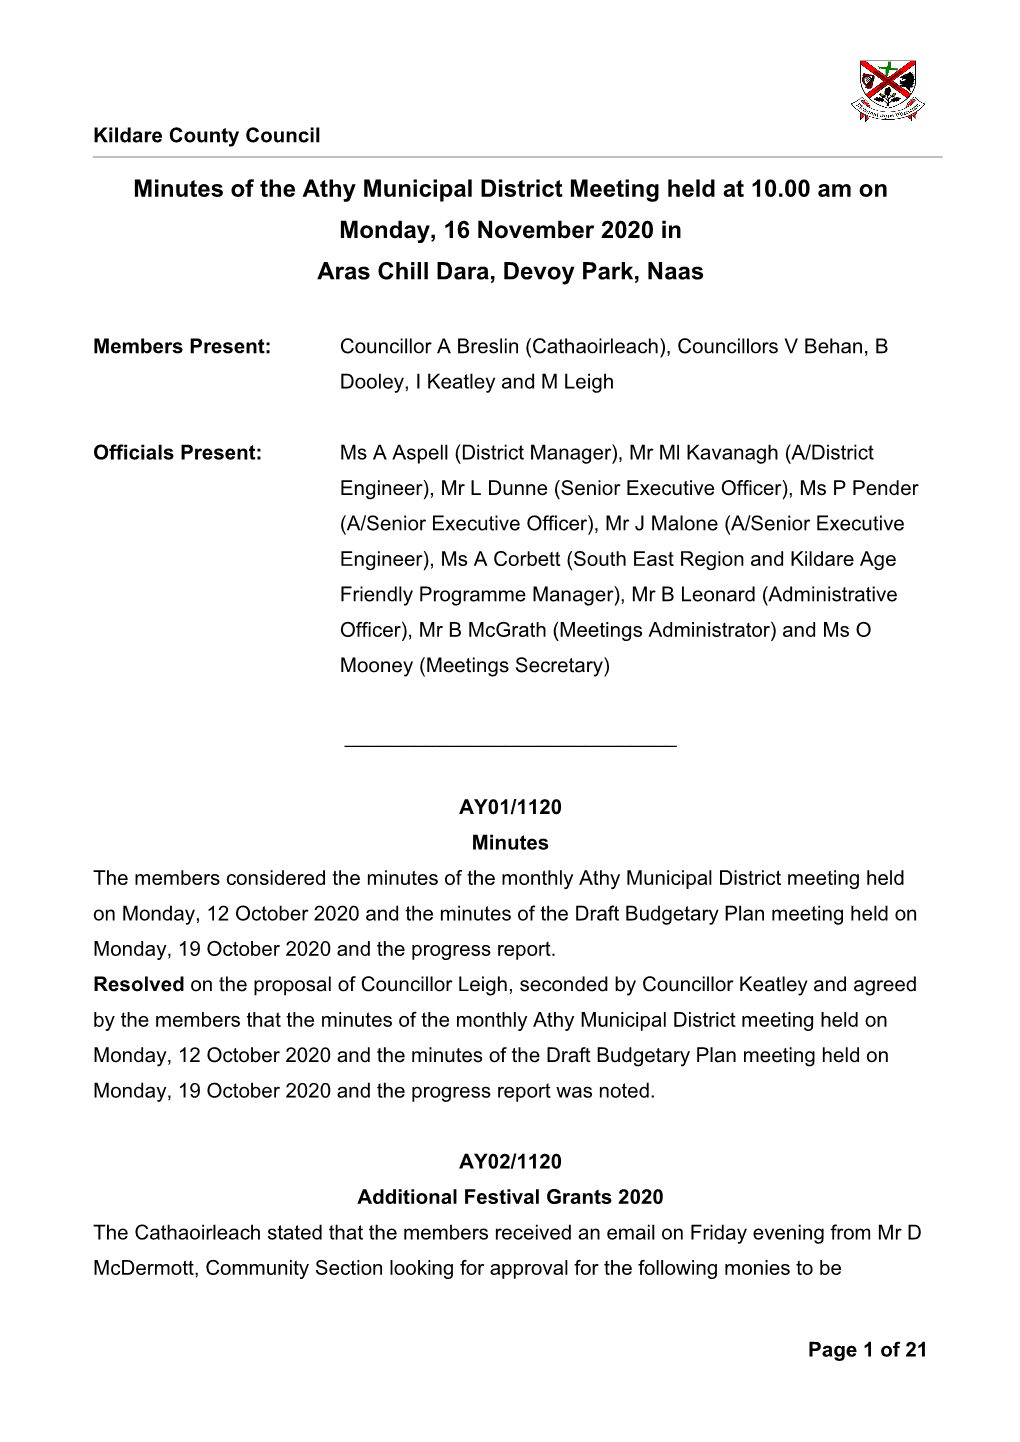 Minutes of the Athy Municipal District Meeting Held at 10.00 Am on Monday, 16 November 2020 in Aras Chill Dara, Devoy Park, Naas